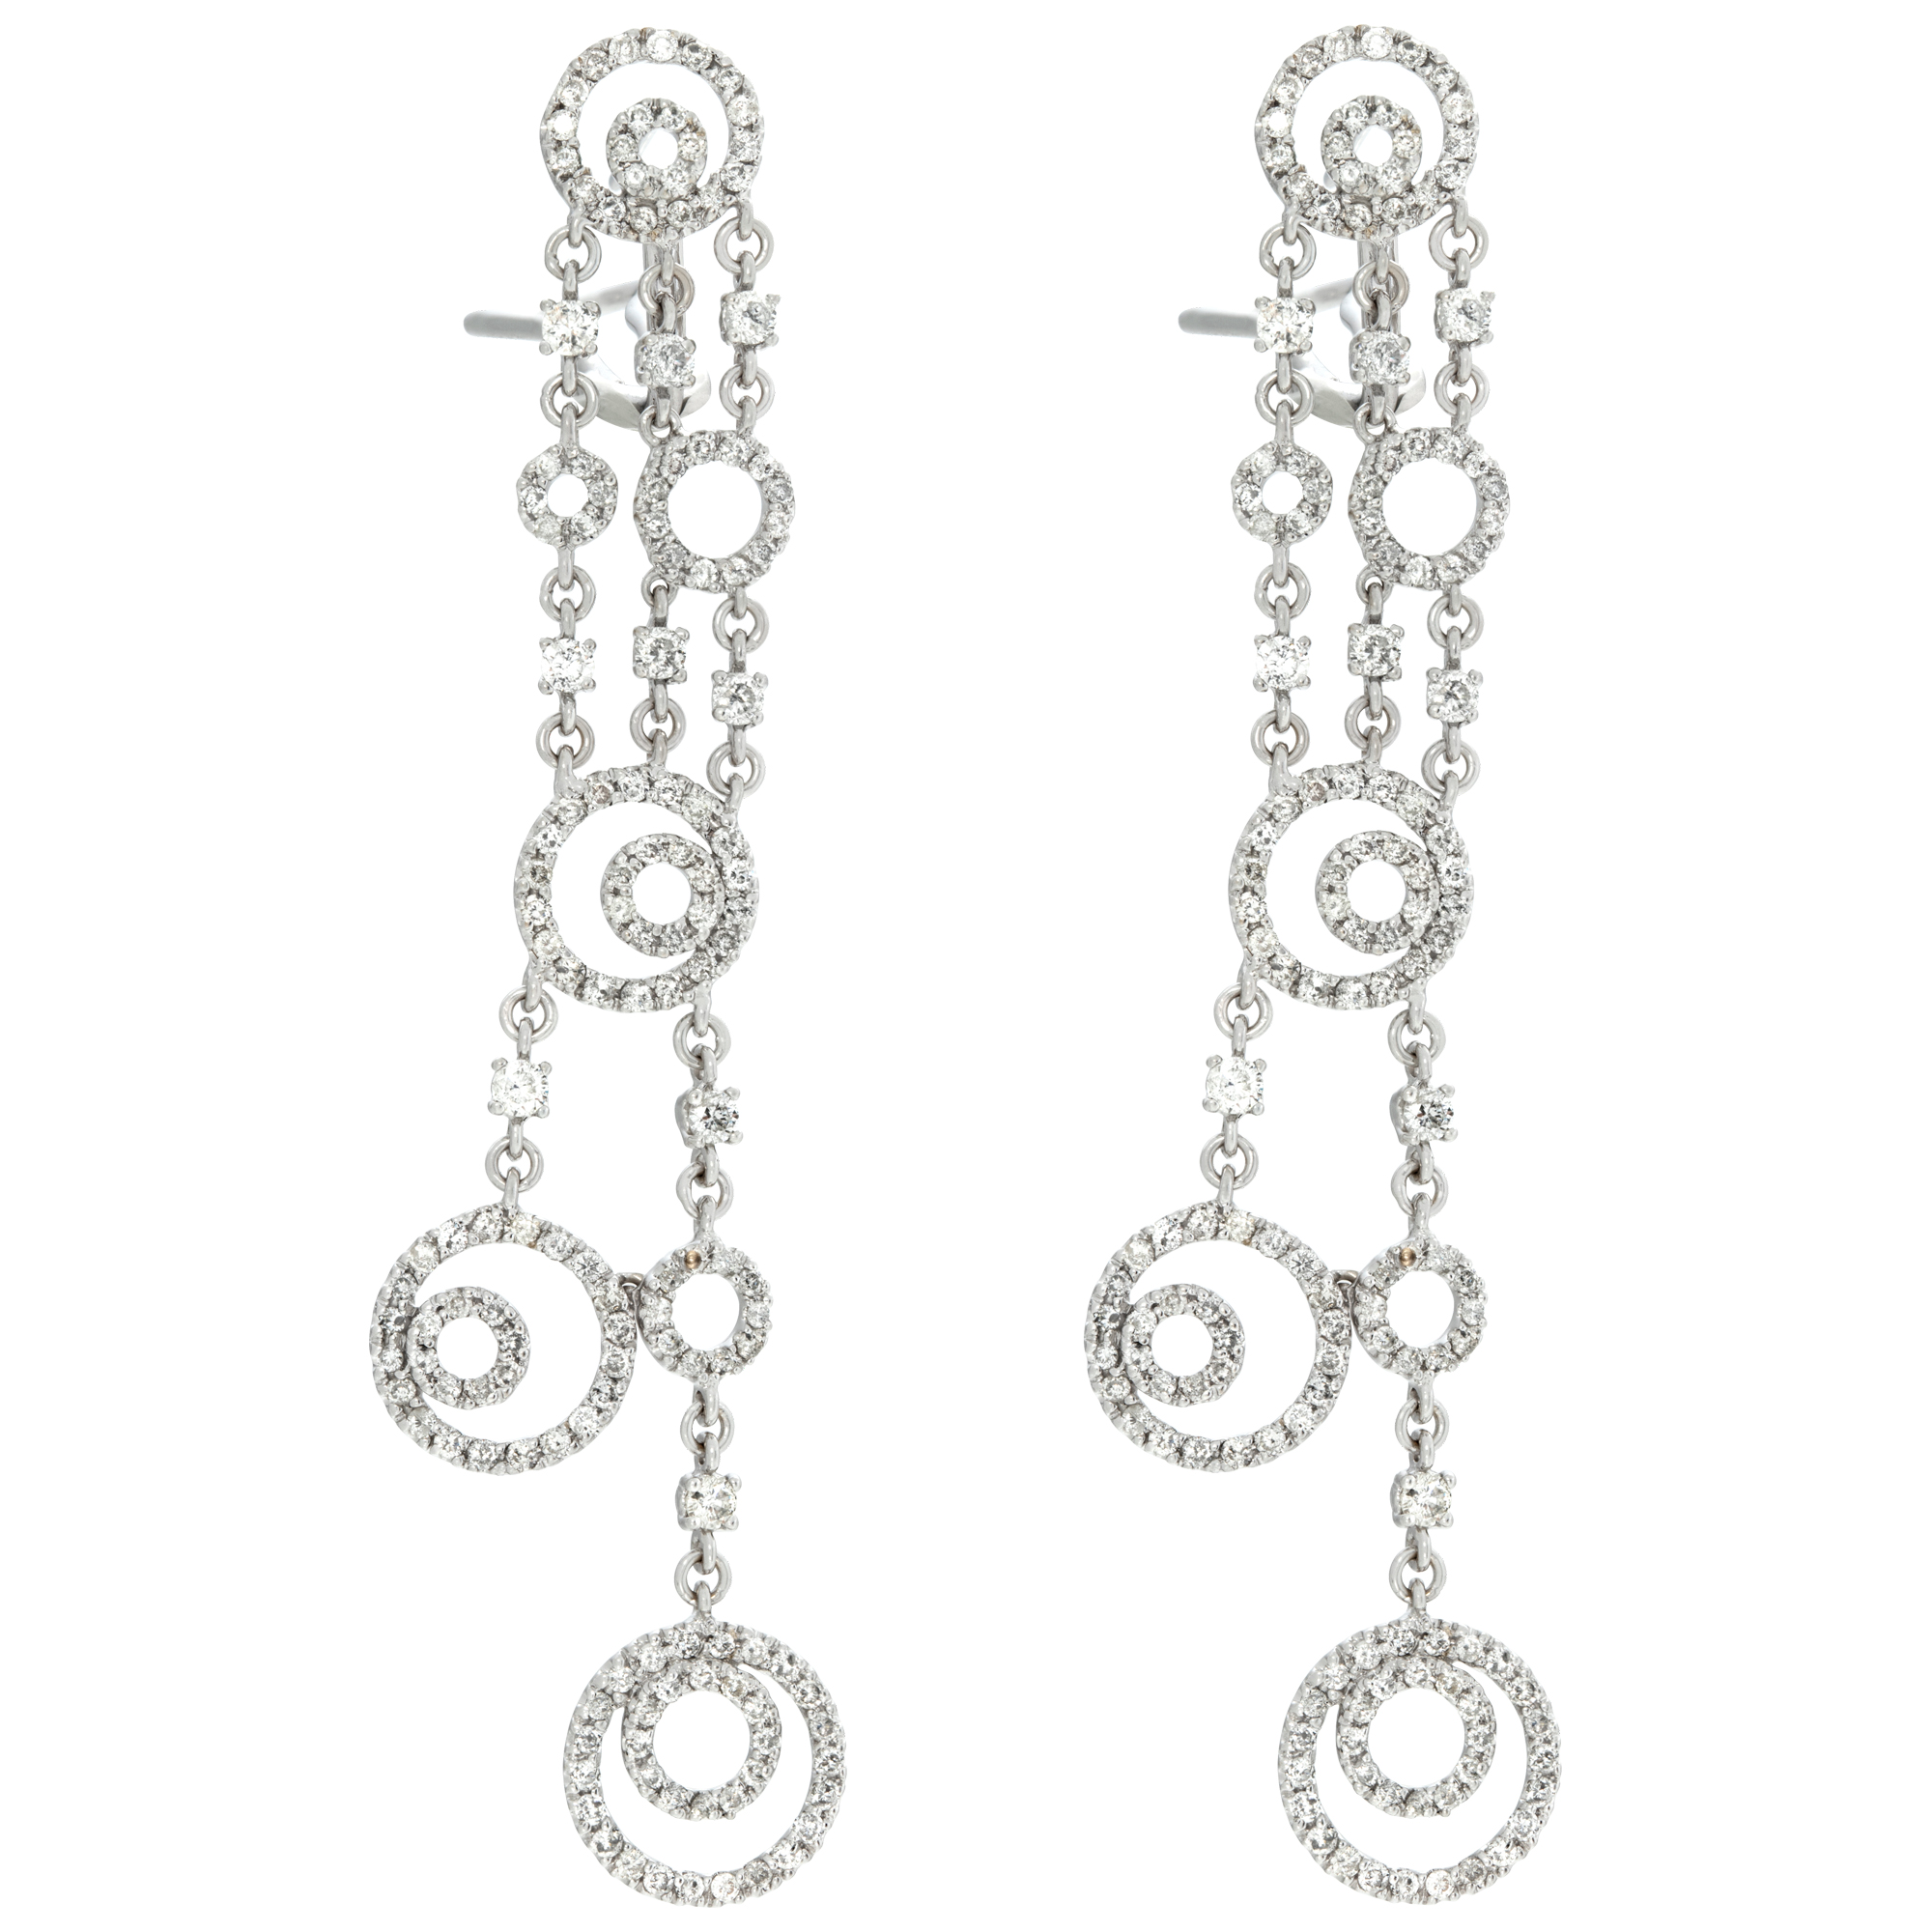 Diamond bubble drop earrings in 18k white gold with 2.50 carats image 1